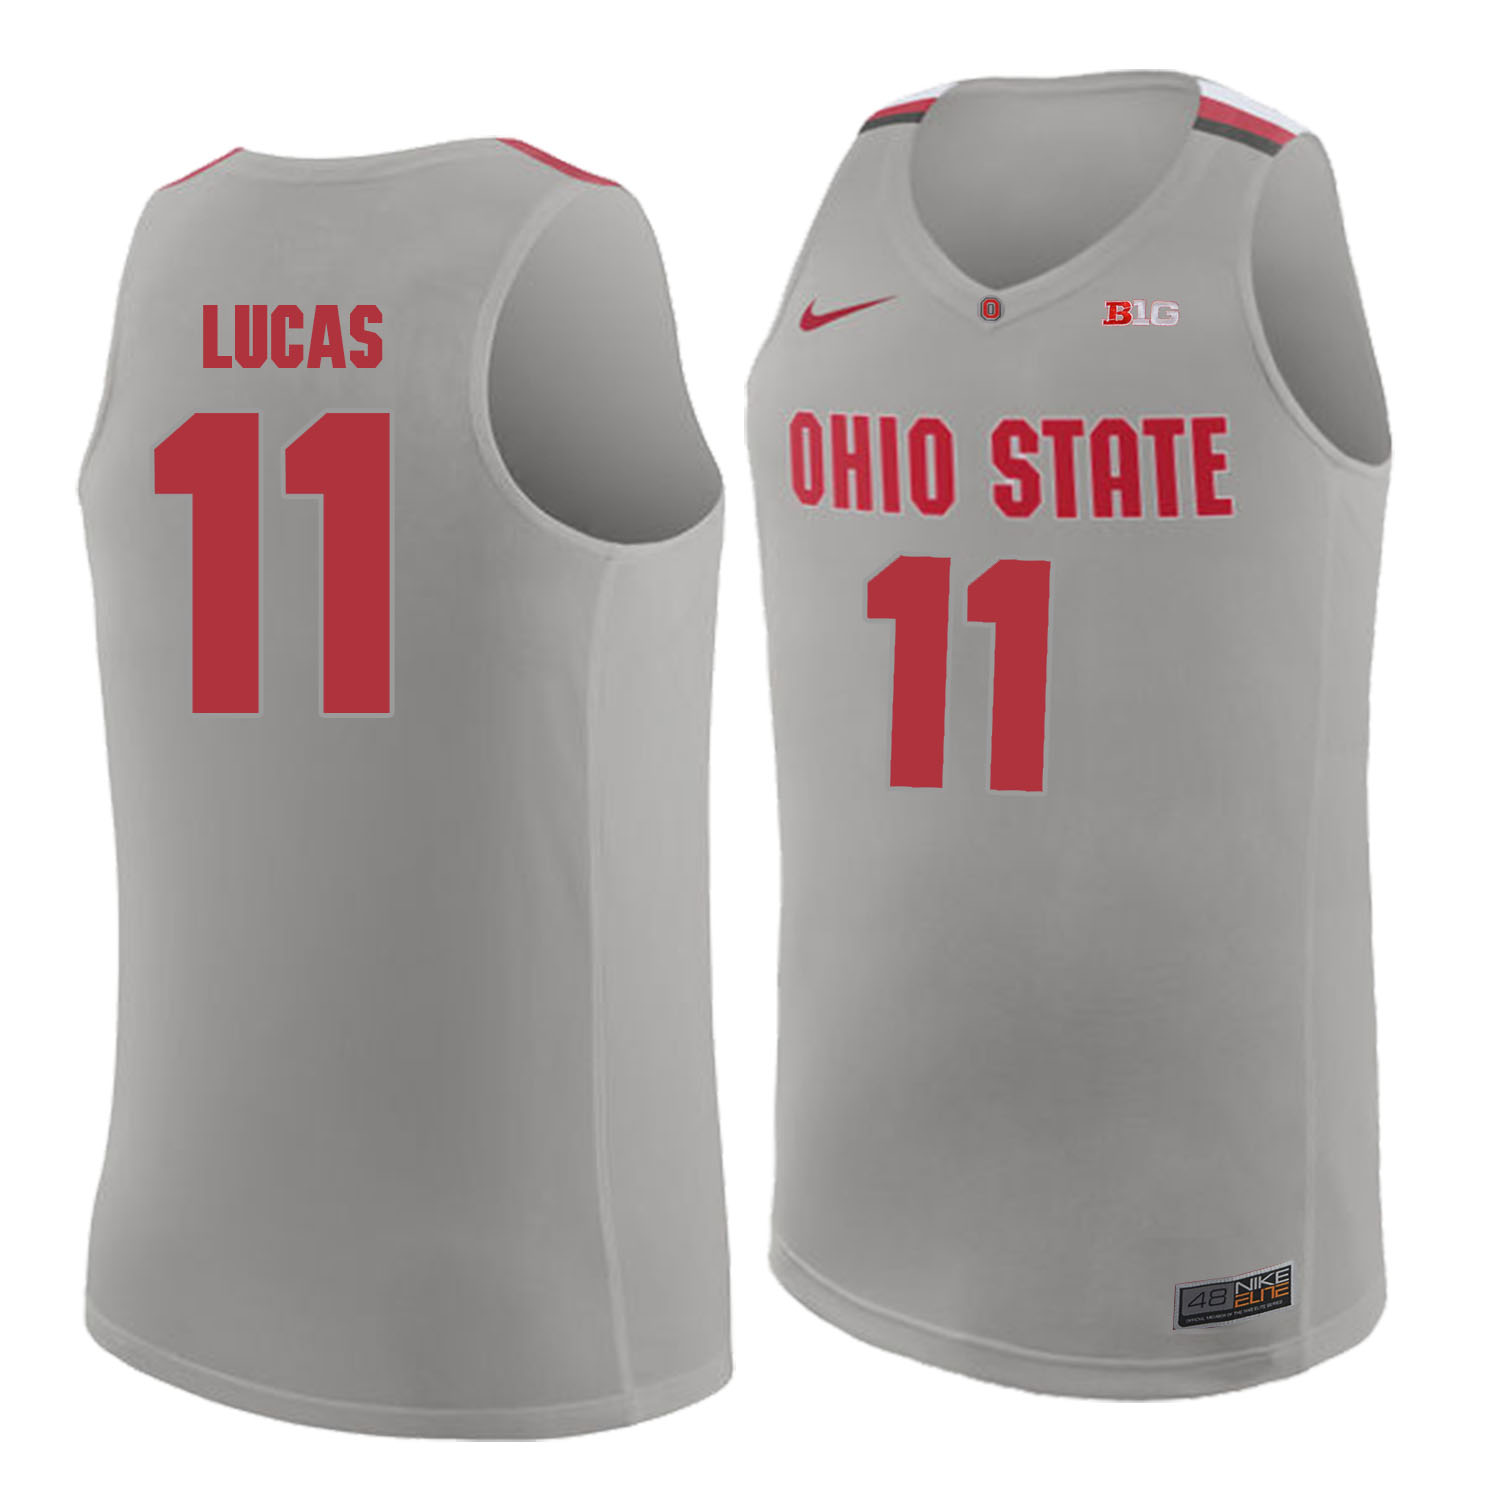 Ohio State Buckeyes 11 Jerry Lucas Gray College Basketball Jersey